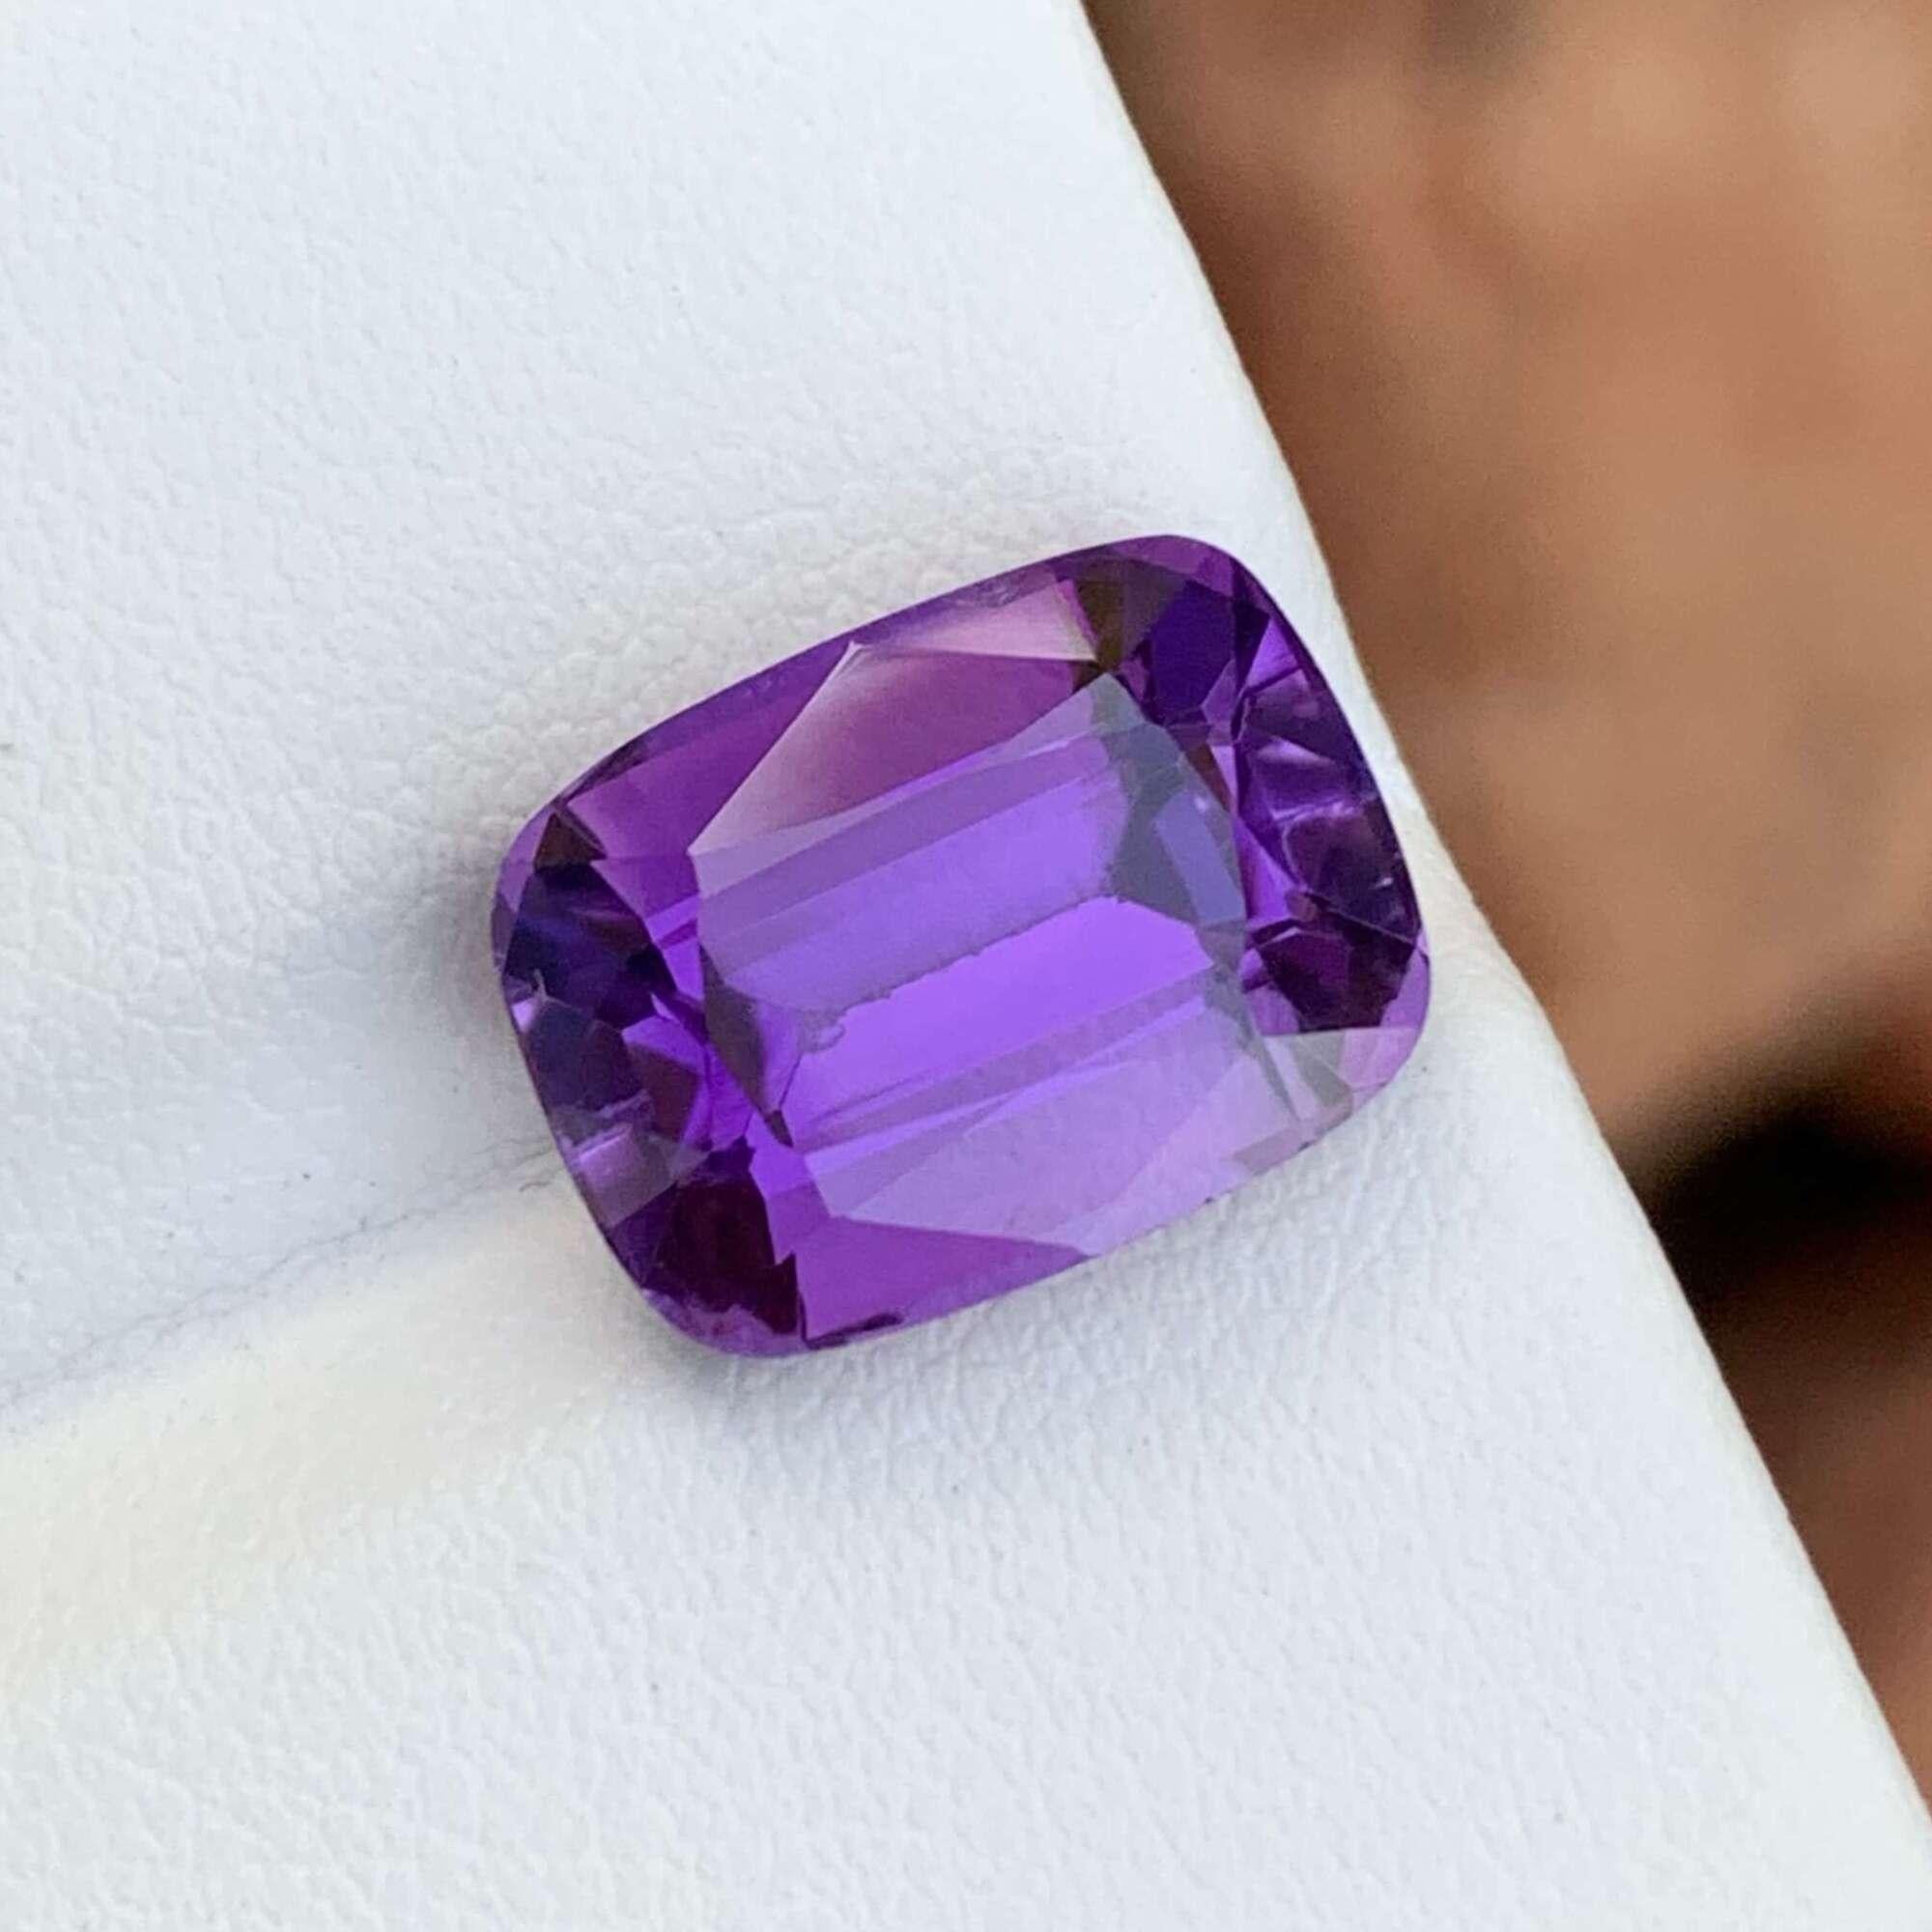 Gorgeous Natural Amethyst Cut Gemstone, Available for sale at wholesale price natural high quality at 7.10 Carats Loupe Clean Clarity Natural Loose Amethyst From Brazil.
 
Product Information:
GEMSTONE TYPE:	Gorgeous Natural Amethyst Cut